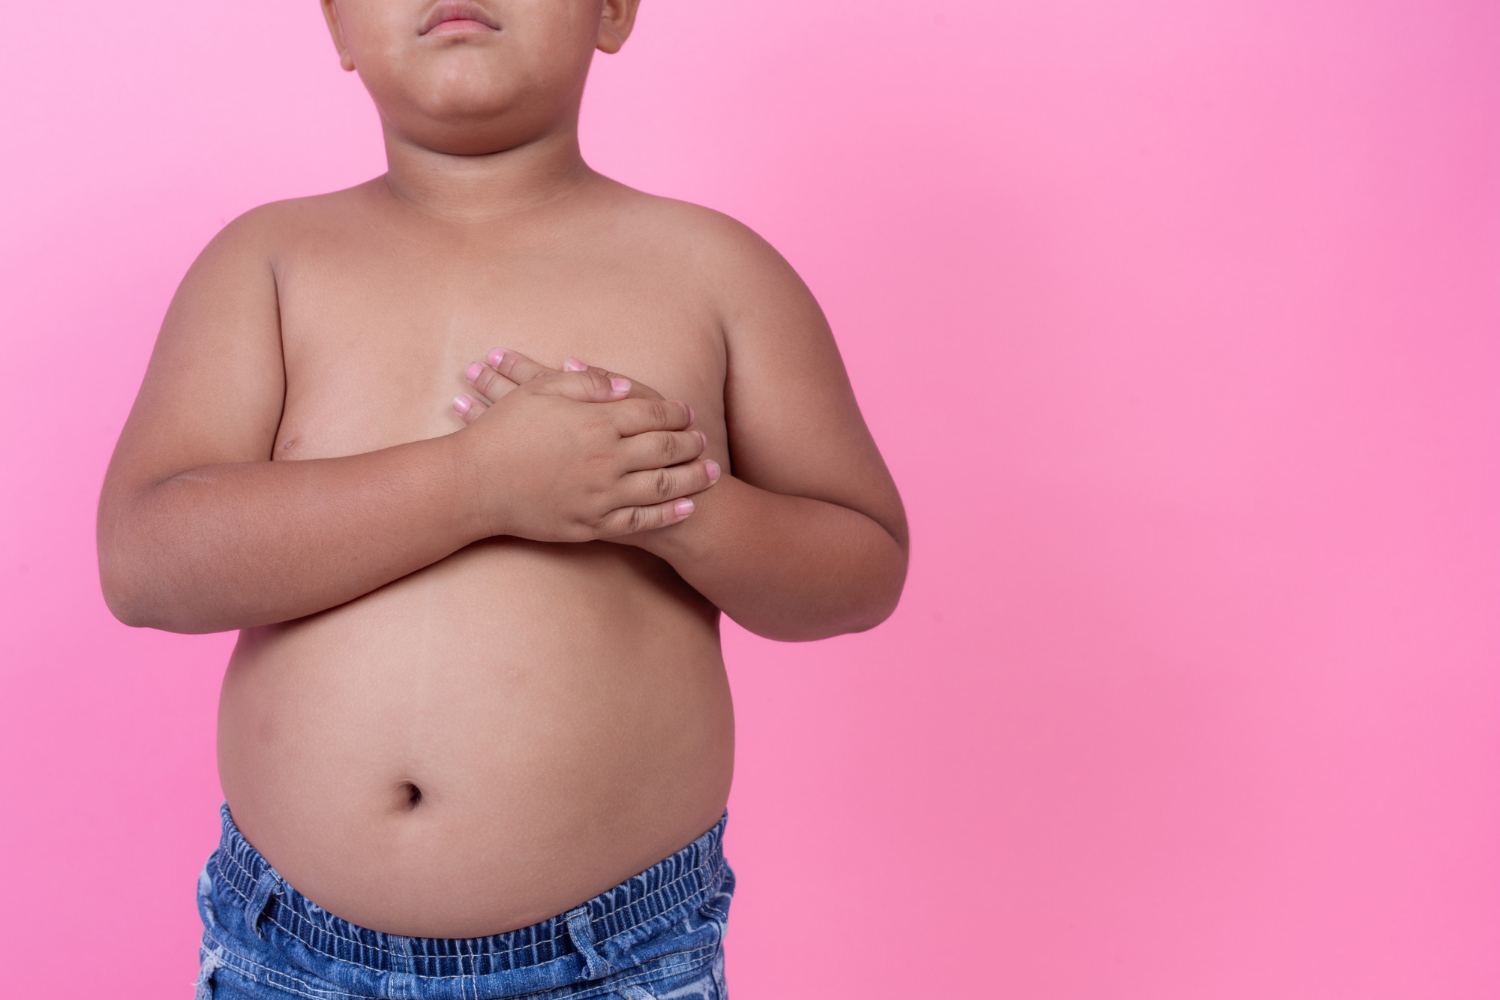 COVID-19 Pandemic Increased Risk For Childhood Obesity